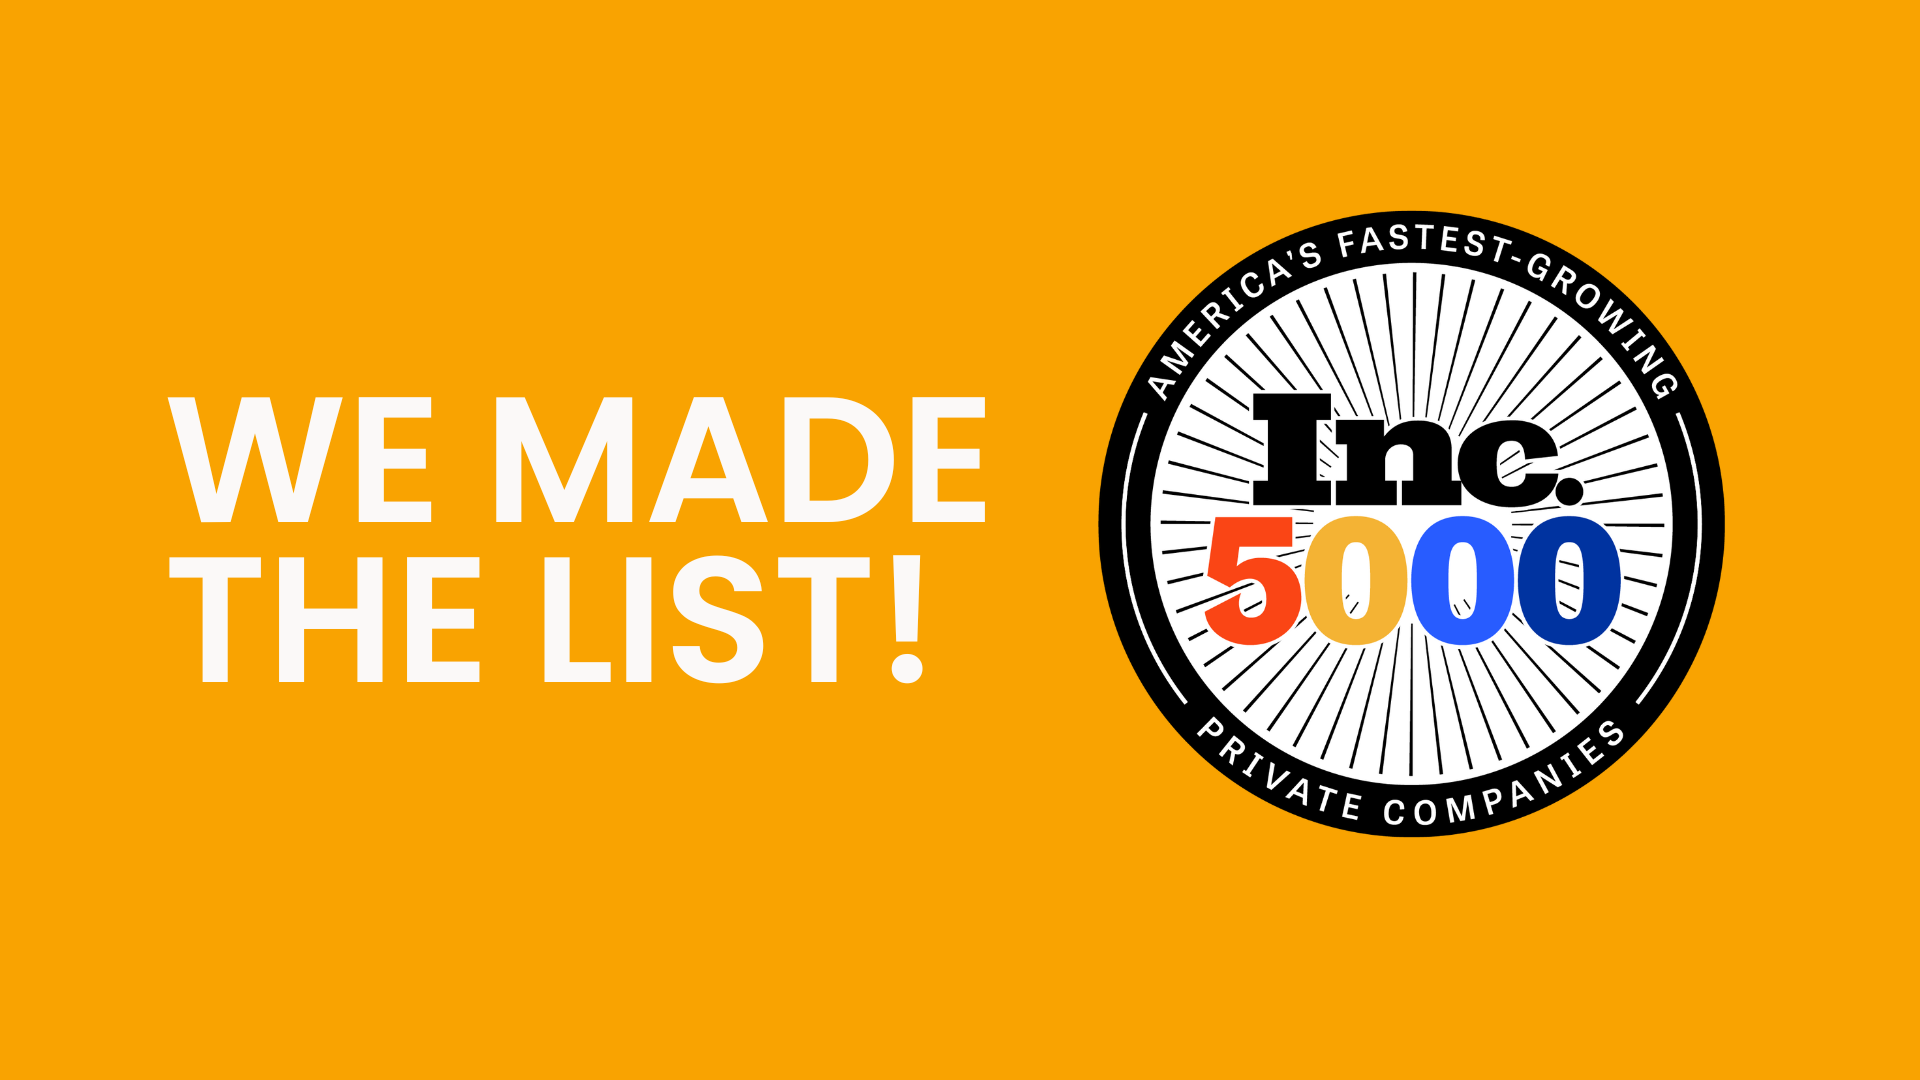 We made the Inc 5000 list Aventi Group